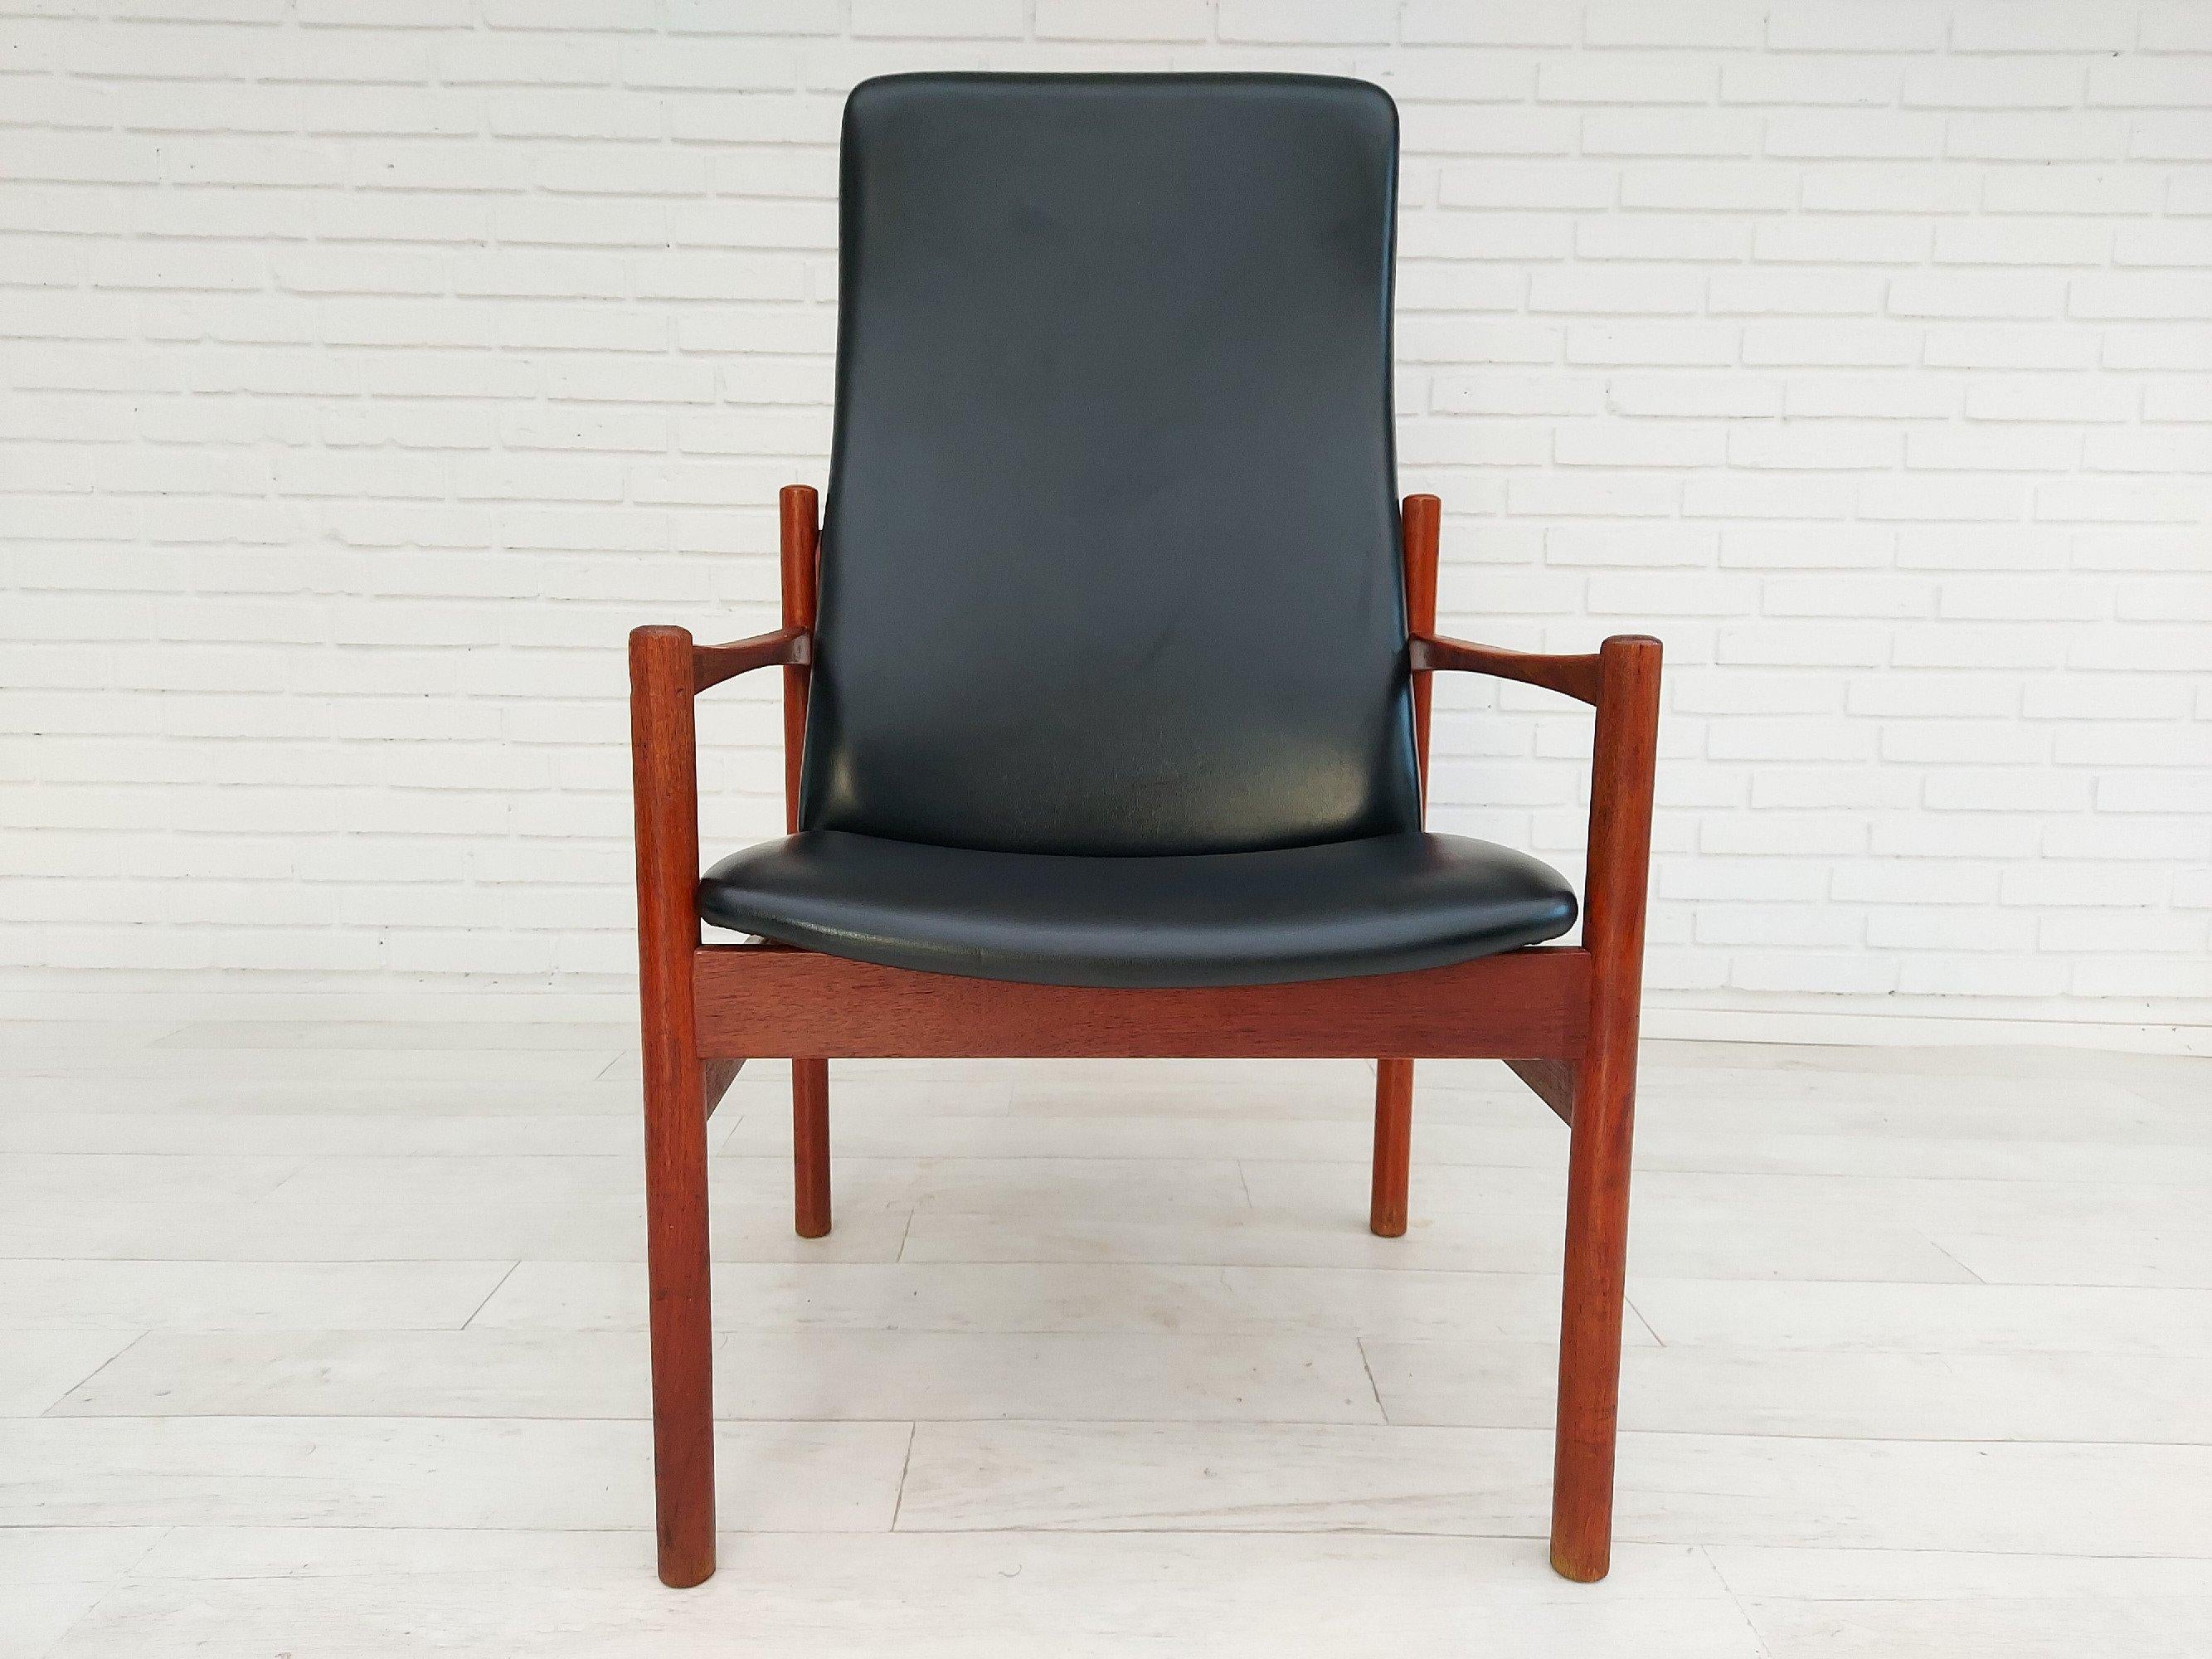 Faux Leather 60s, Danish Armchair with Stool, Teak Wood, Original Very Good Condition For Sale